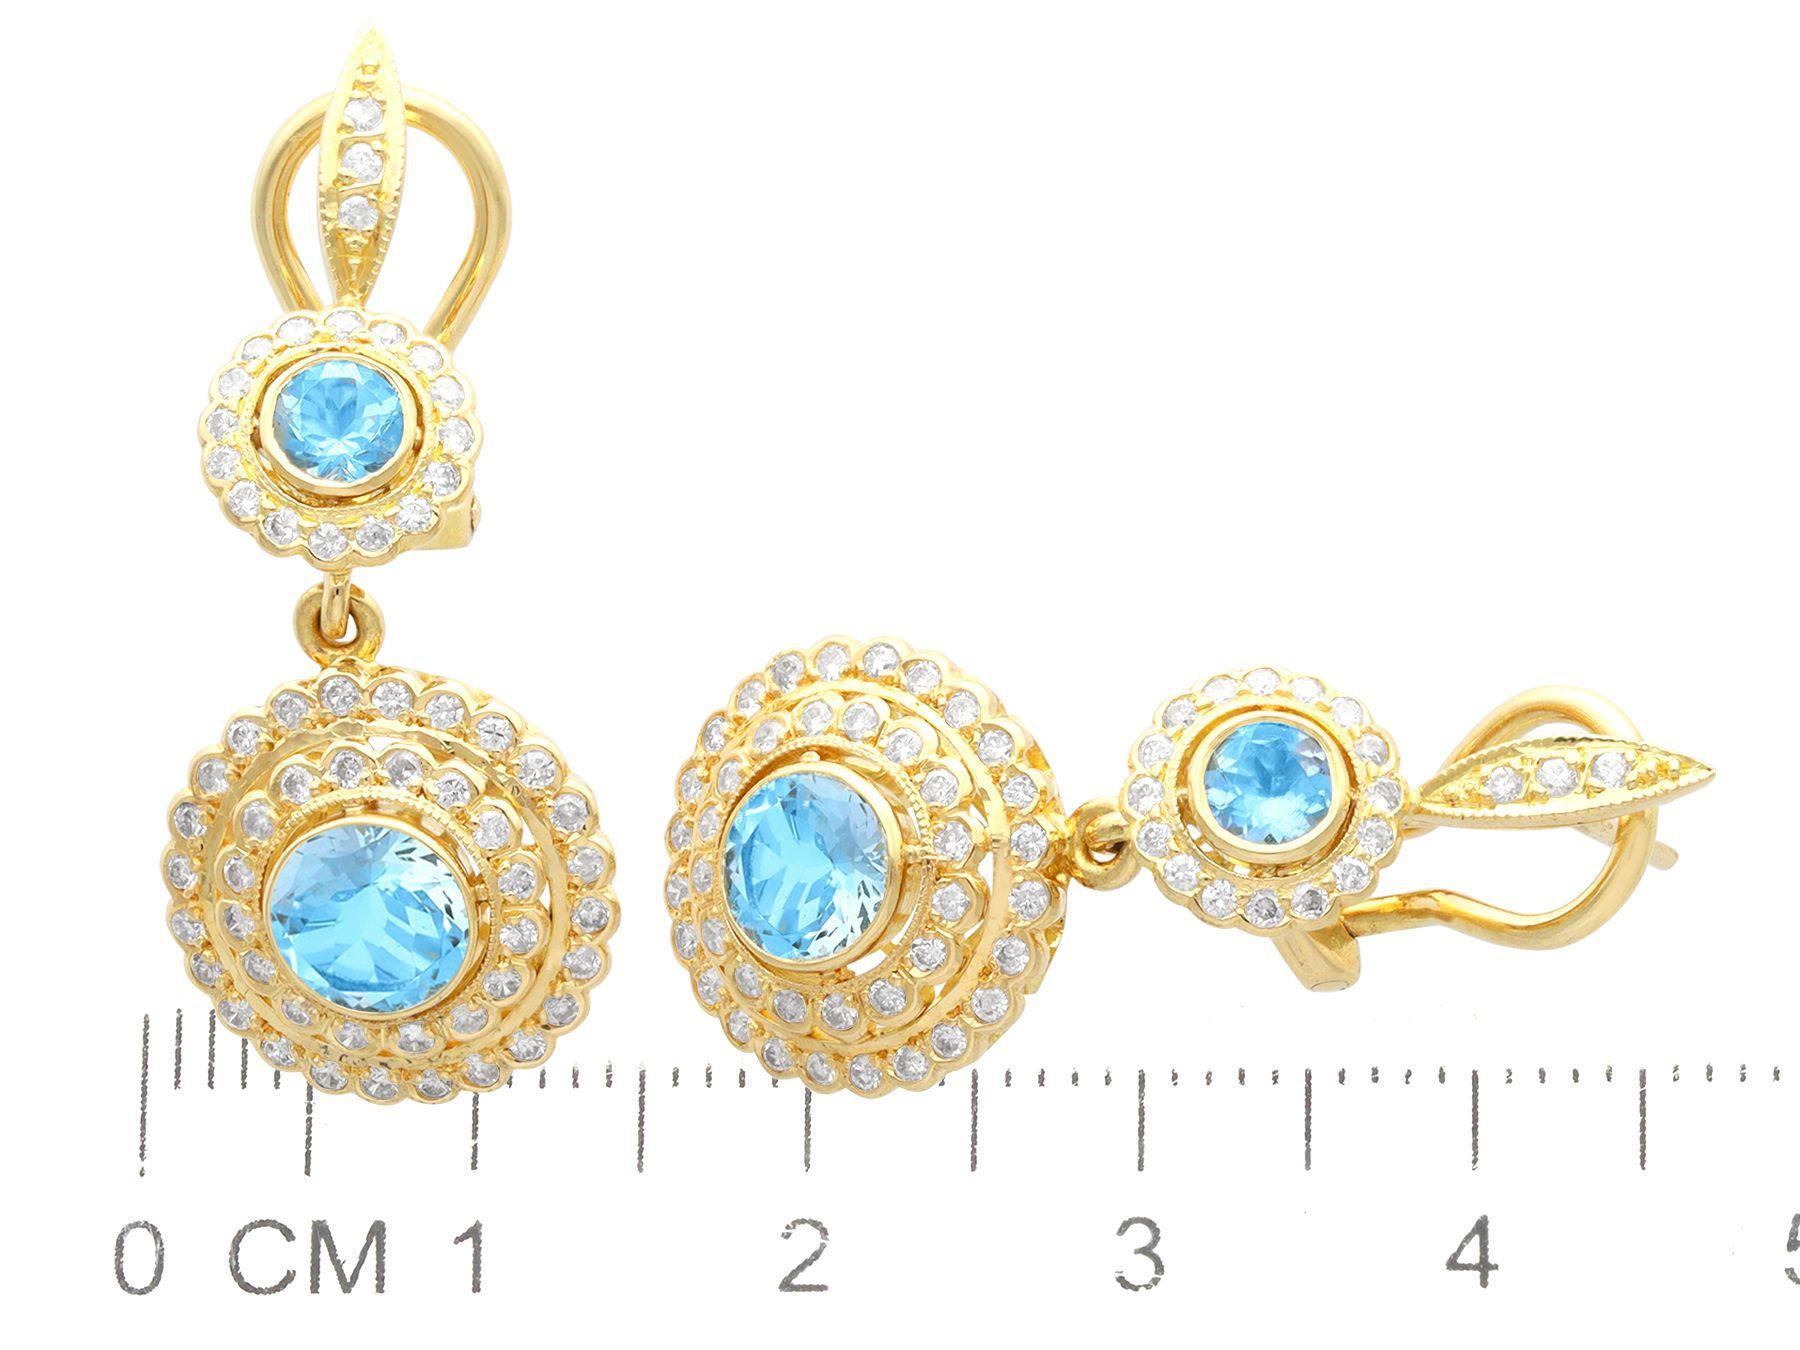 Vintage 1.80 Carat Aquamarine and 1.20 Carat Diamond and Yellow Gold Earrings For Sale 2